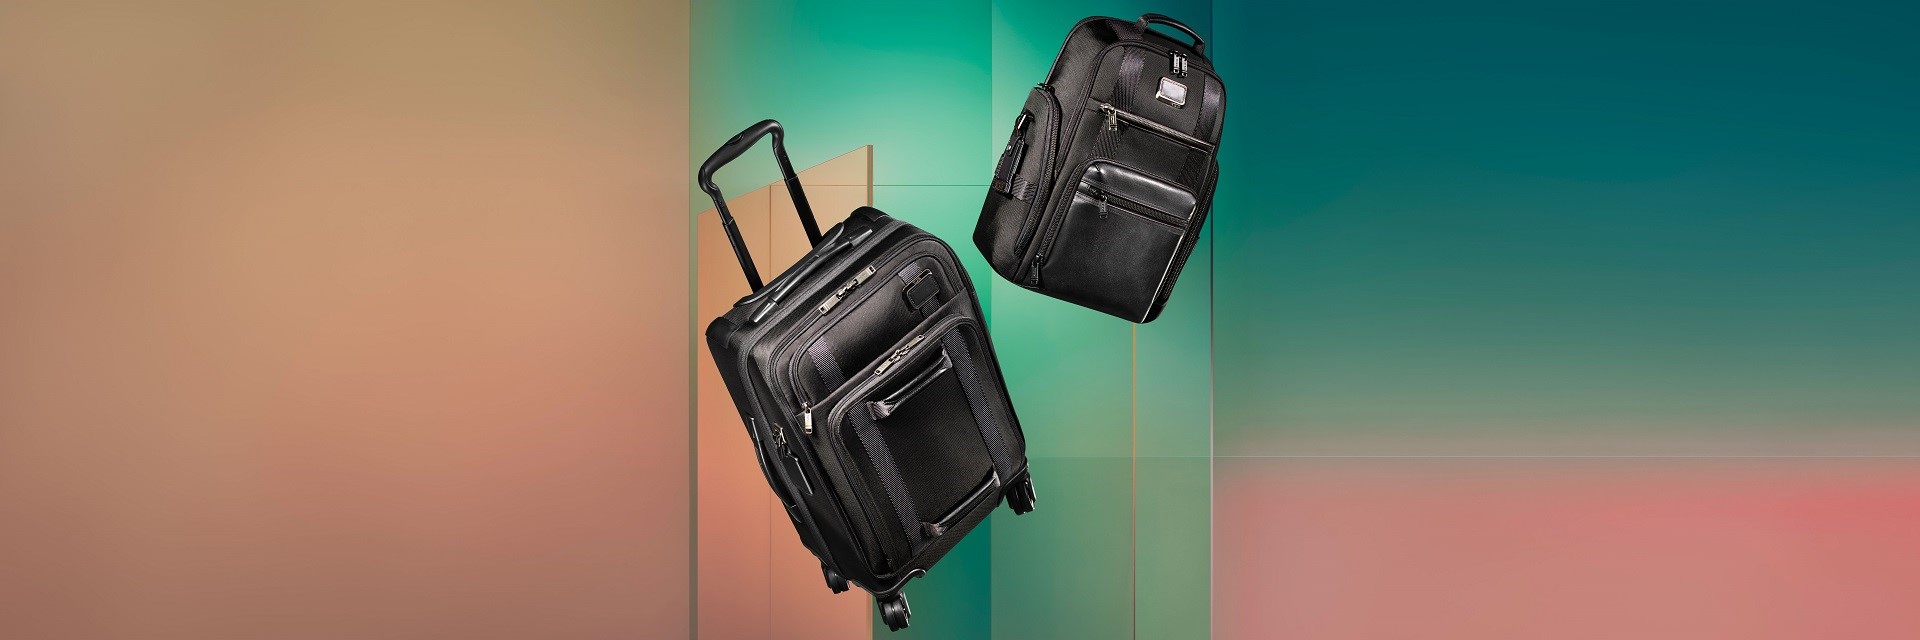 world-class travel bags from tumi